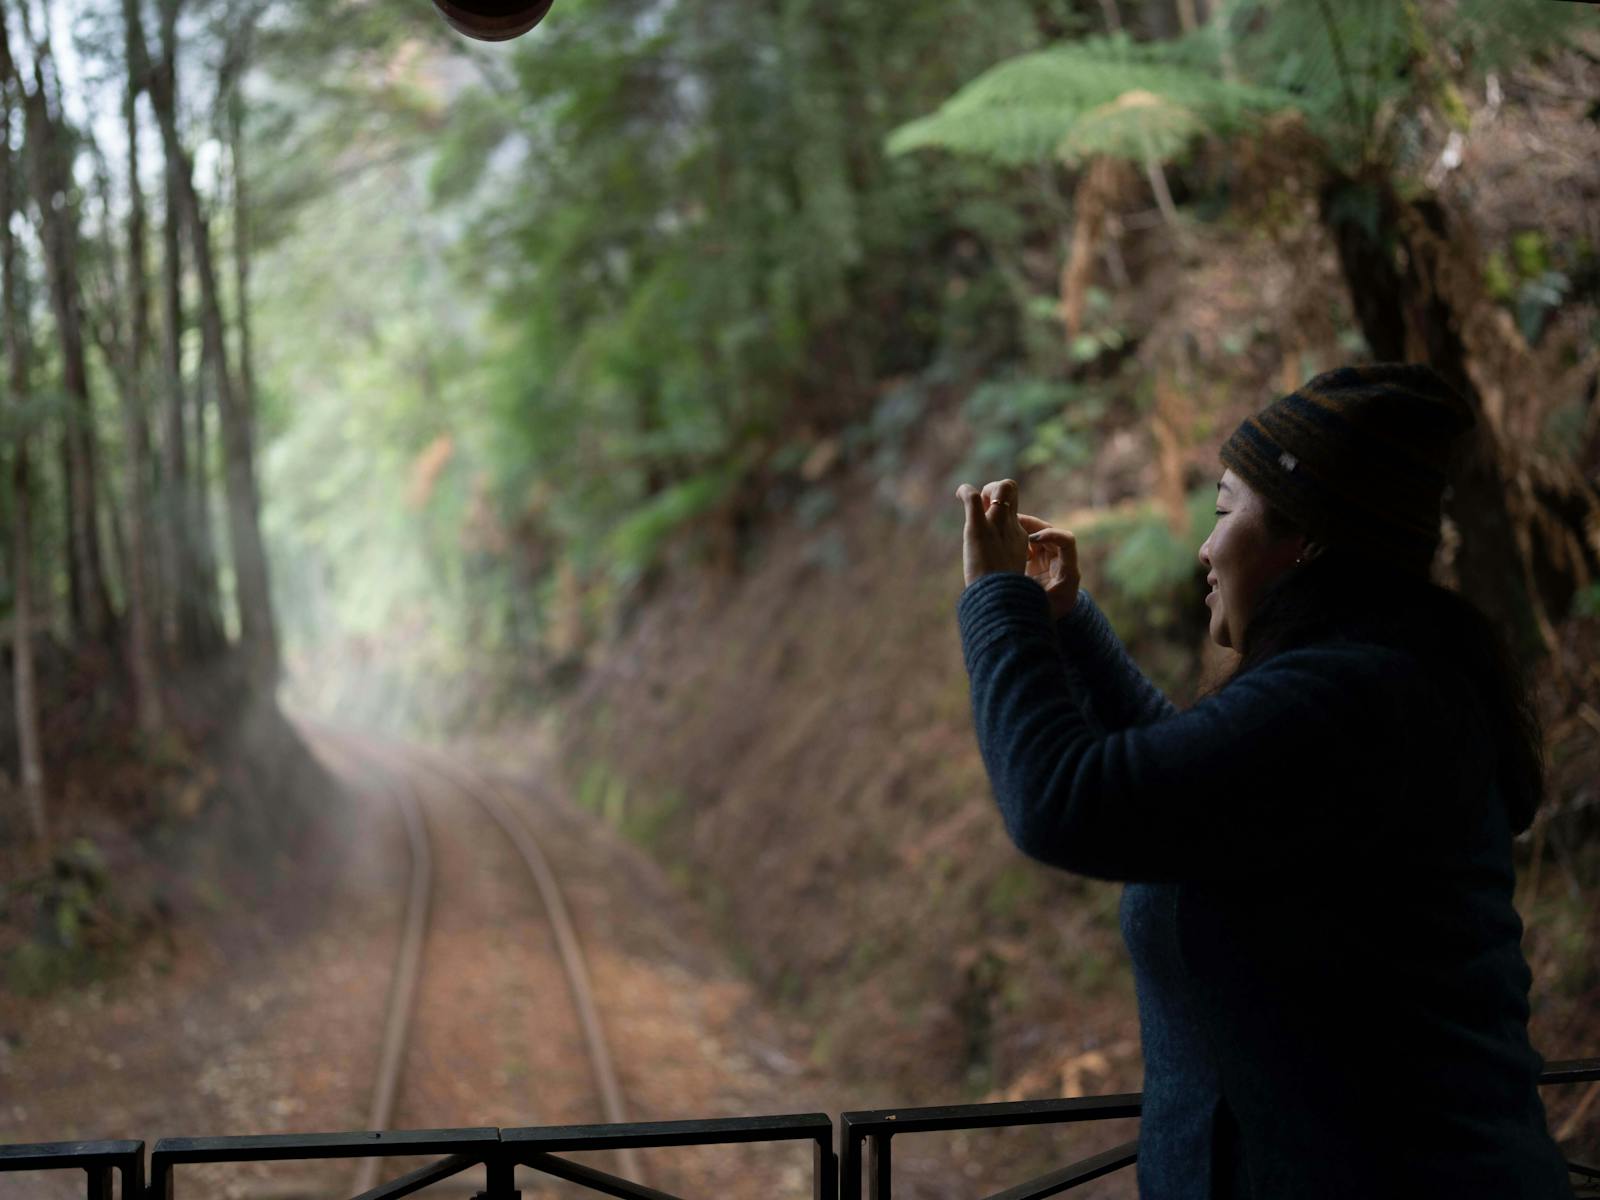 A wilderness carriage passenger takes a photo from the carriage balcony